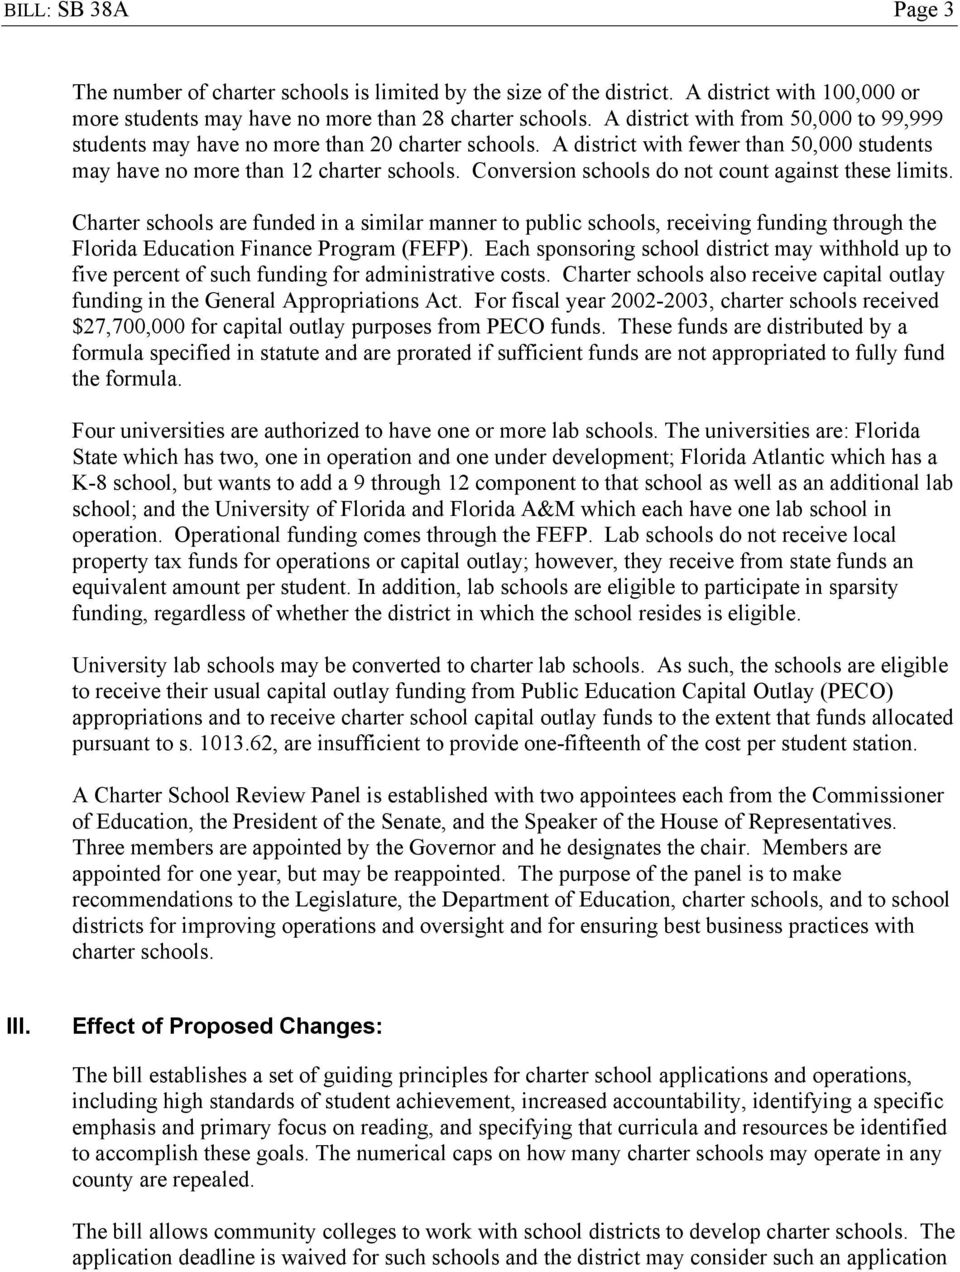 Conversion schools do not count against these limits. Charter schools are funded in a similar manner to public schools, receiving funding through the Florida Education Finance Program (FEFP).